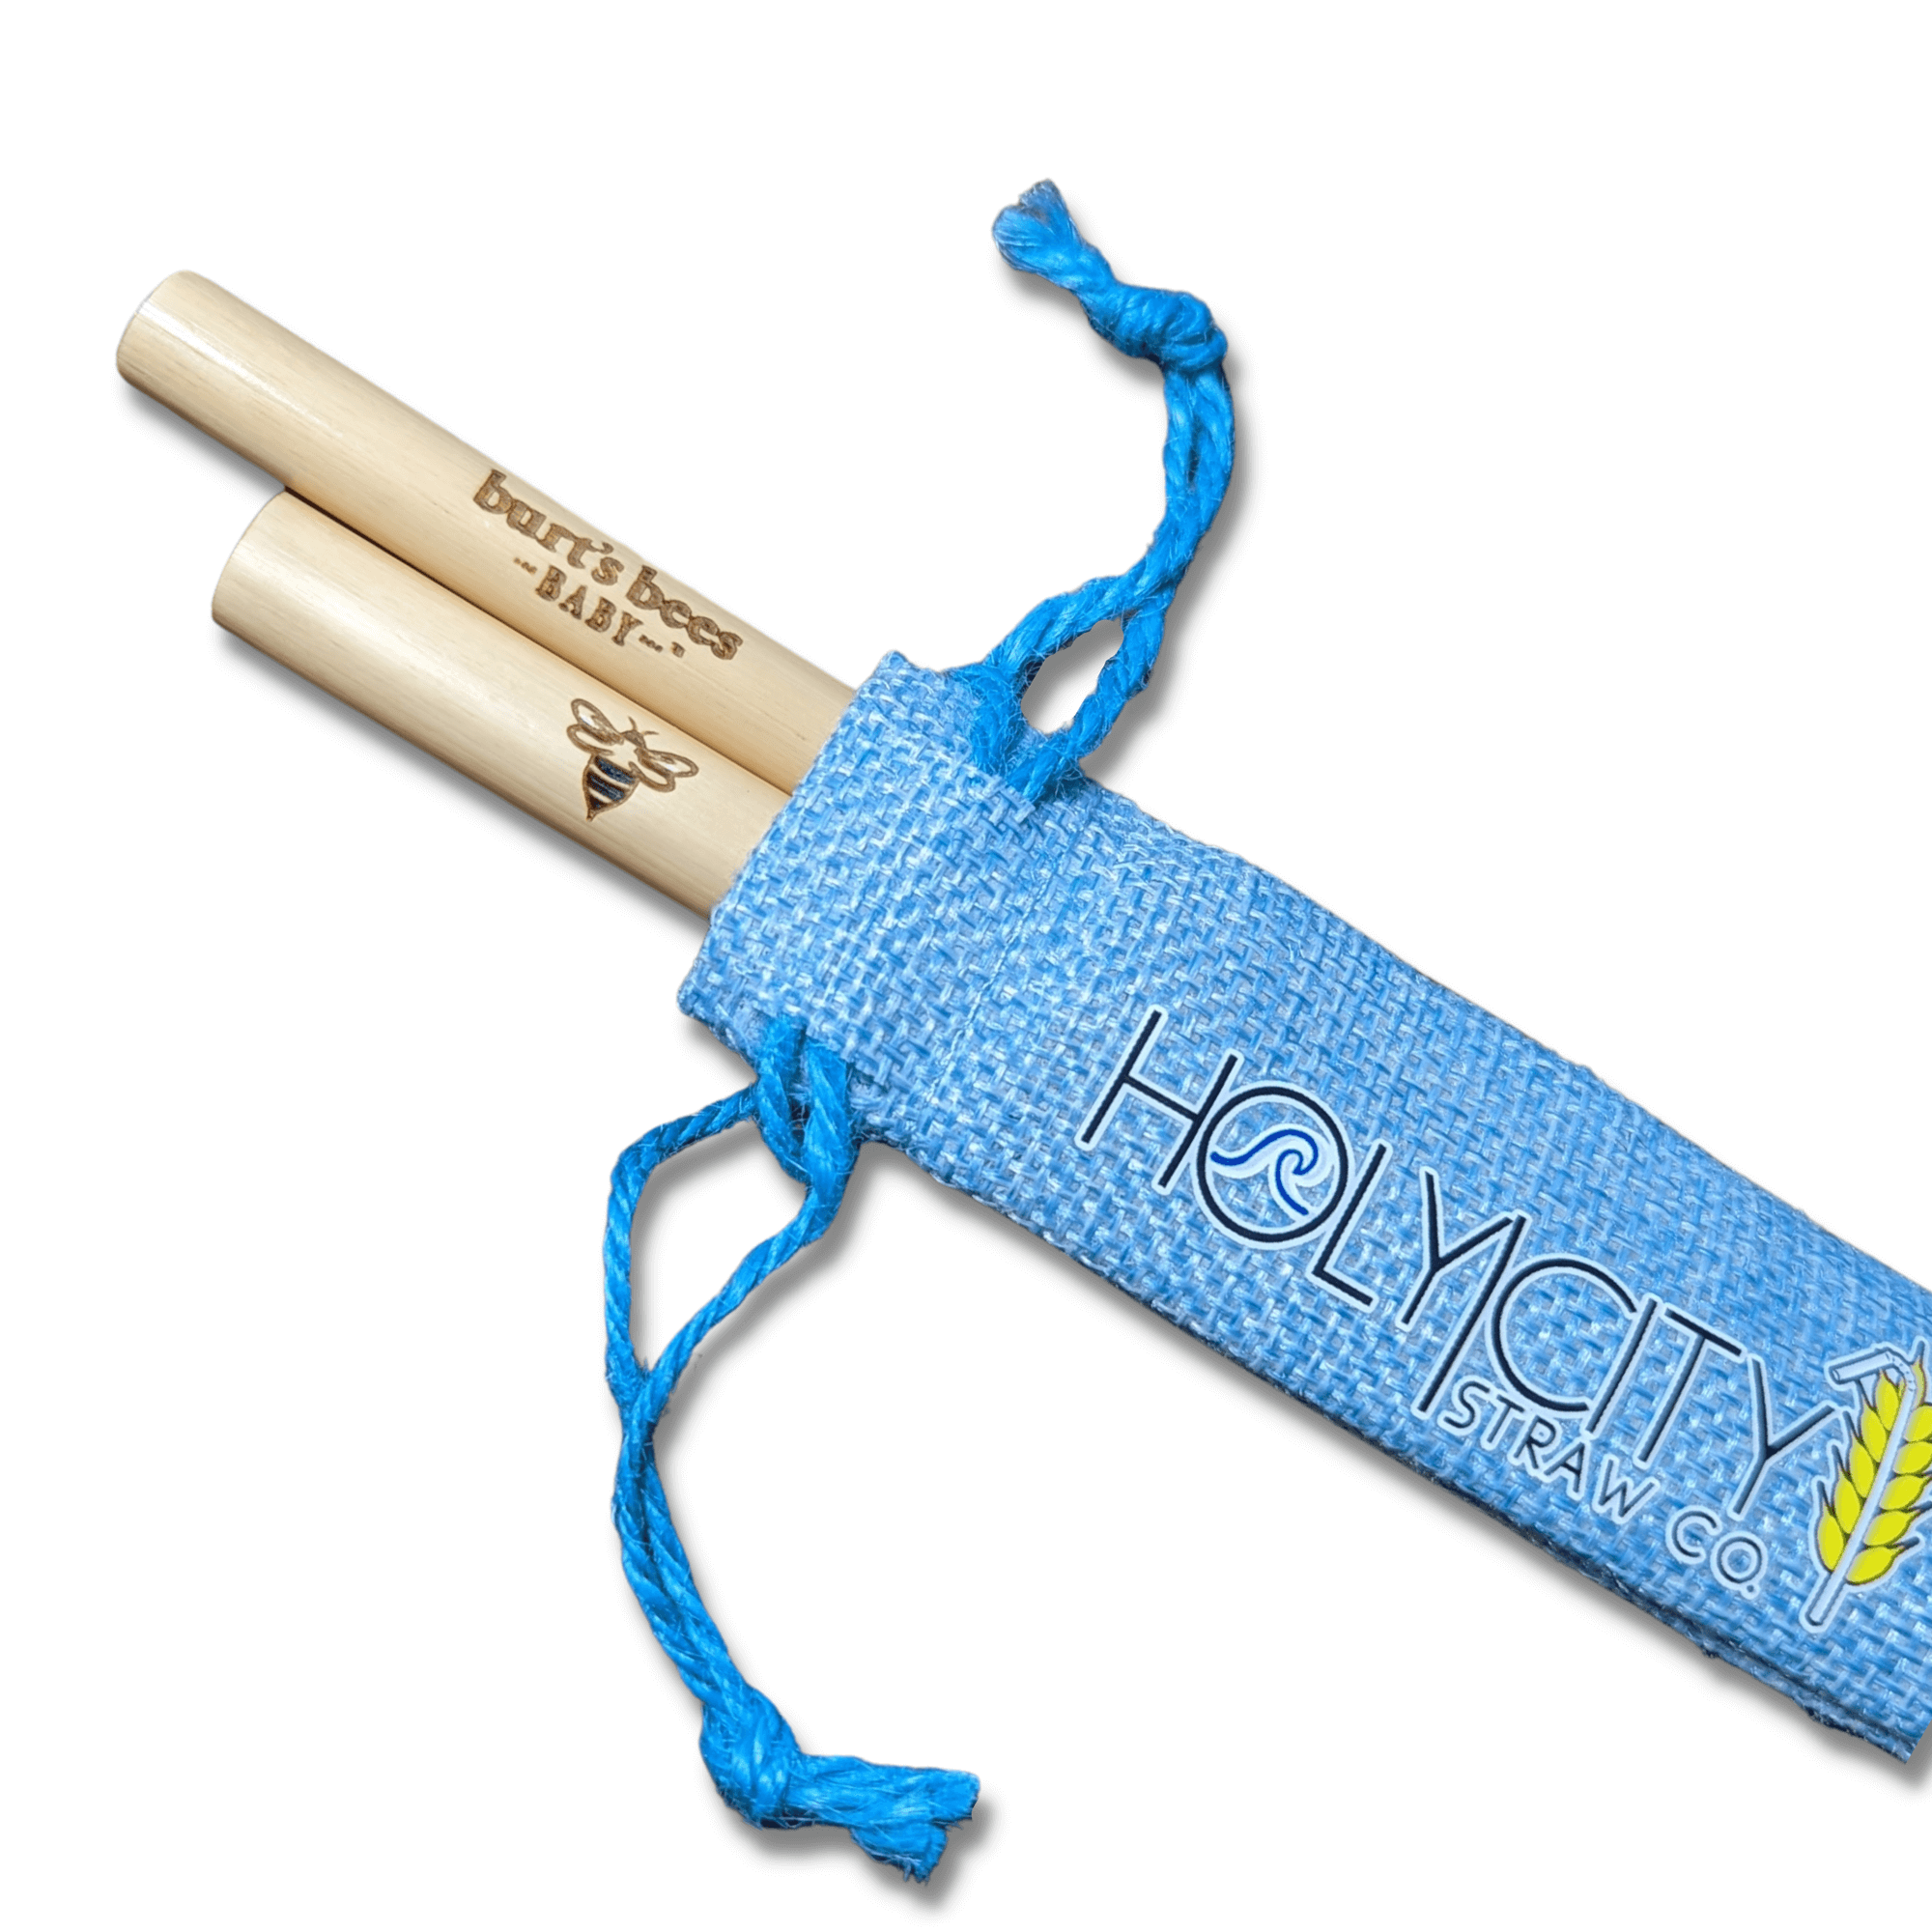 Customizable Two Straw/ Holy City Straw Co. Branded Jute Pouch Combo.